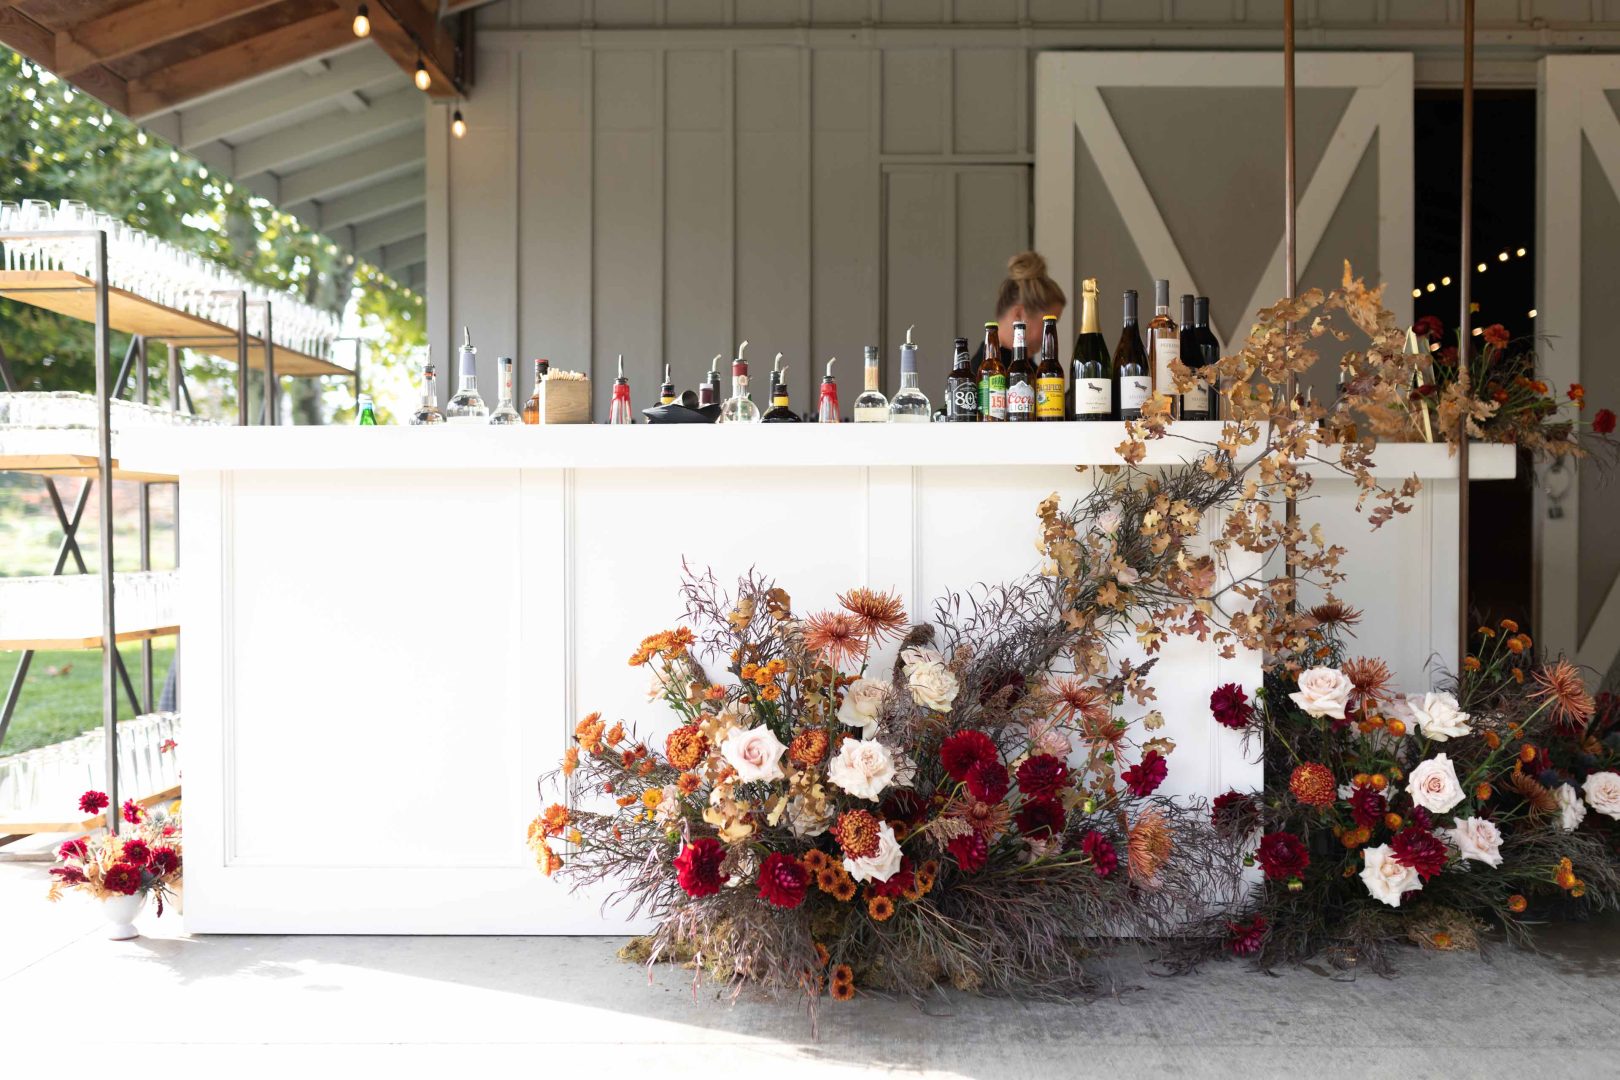 Outdoor venue bar with floral decorations